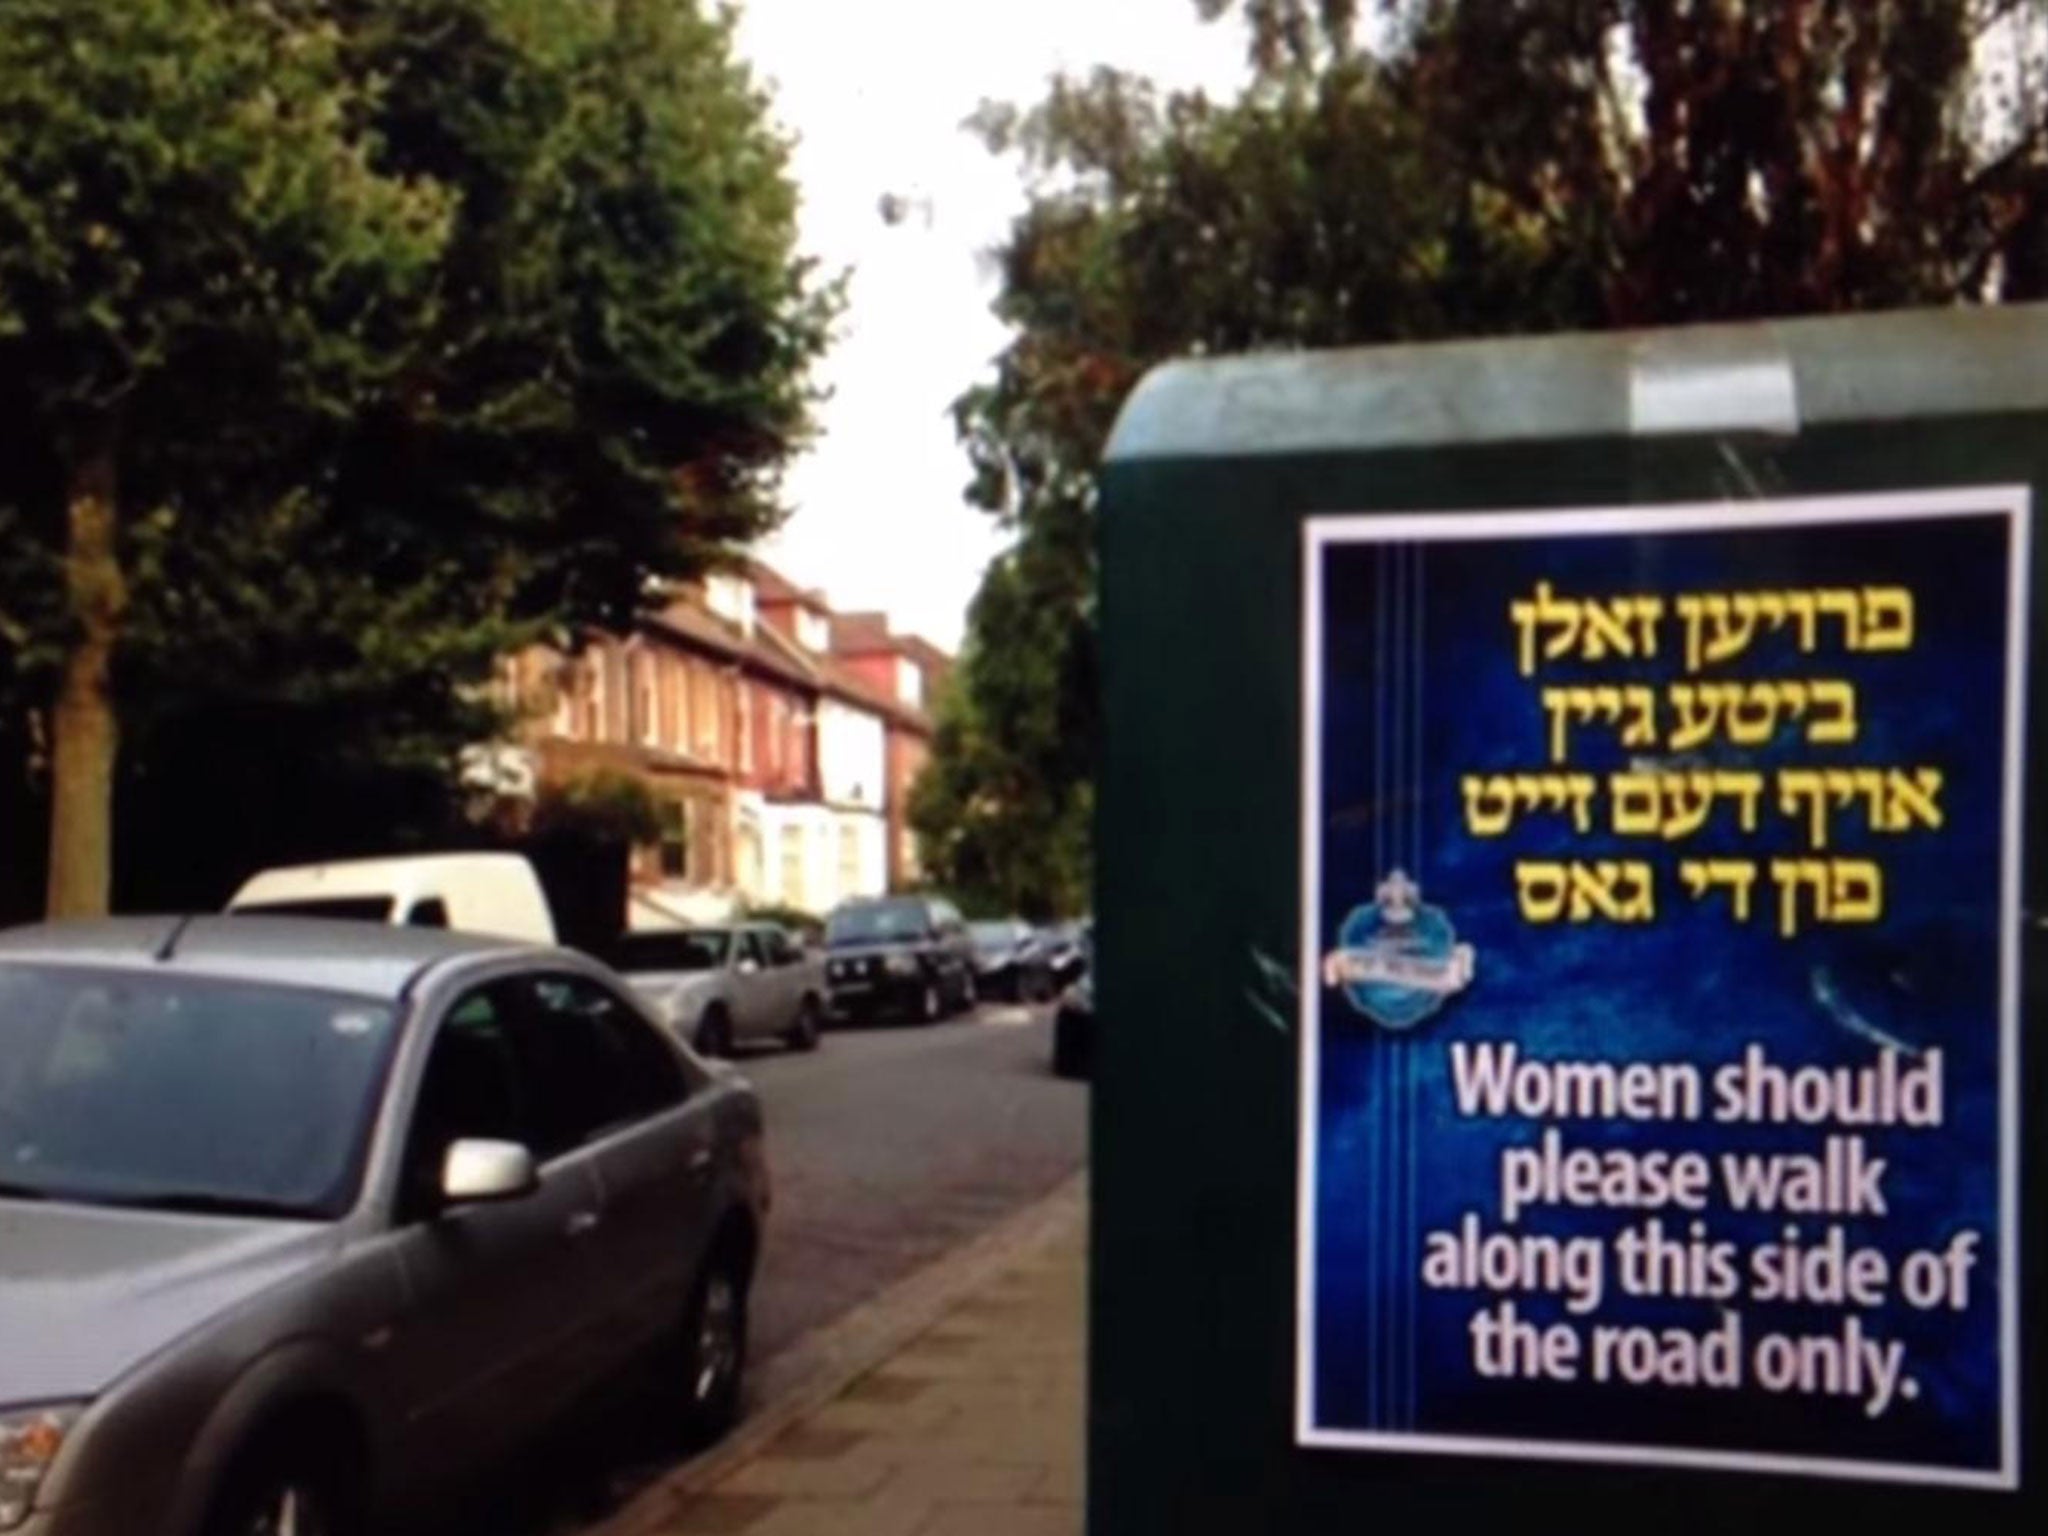 The posters were put up ahead of a Torah parade